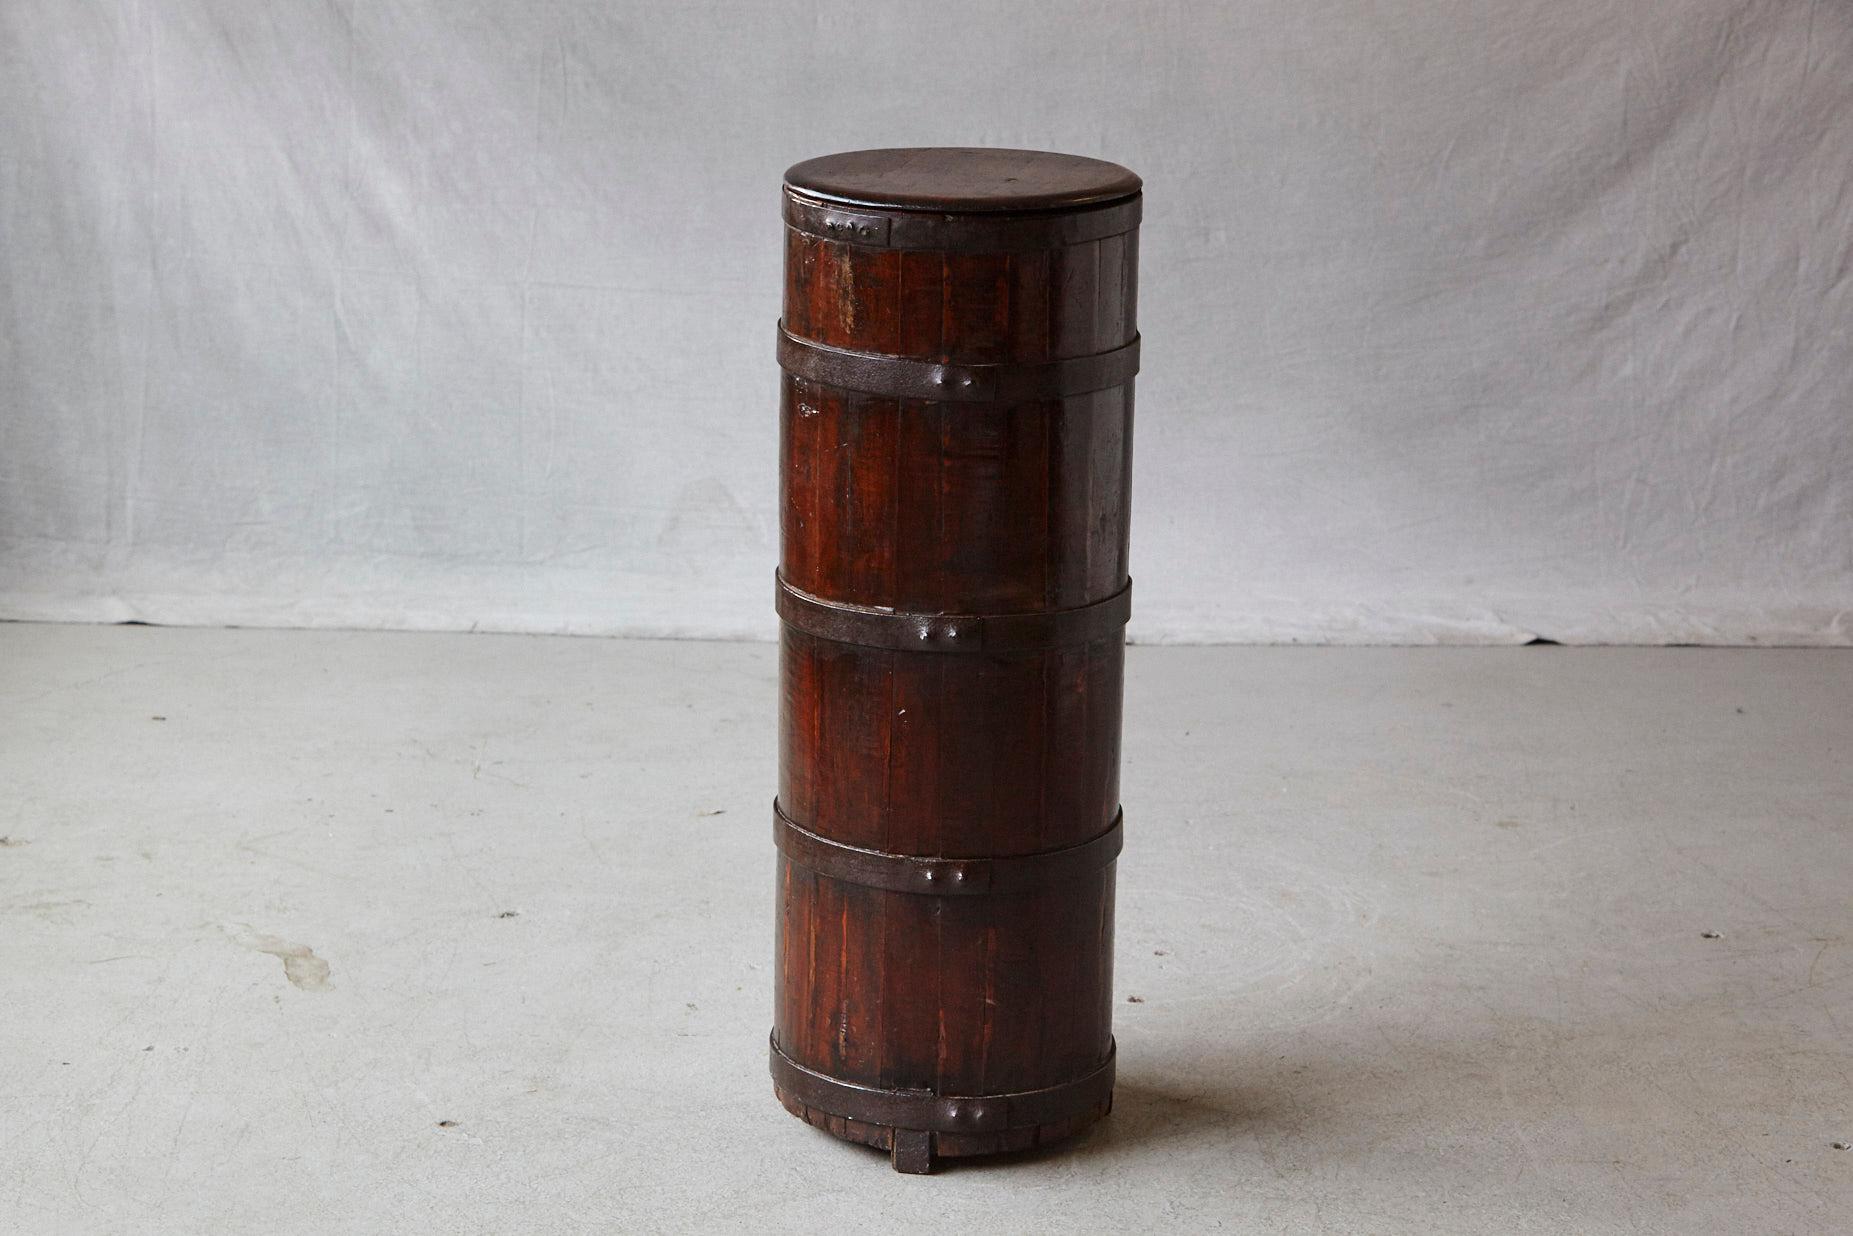 Late 19th century tall Chinese fir barrel from Zhejiang, circa 1870s.
Very solid, iron banded fir wood construction. The lid has been professionally restored / replaced by a new lid which was carved after the old broken lid, in the 1970s in